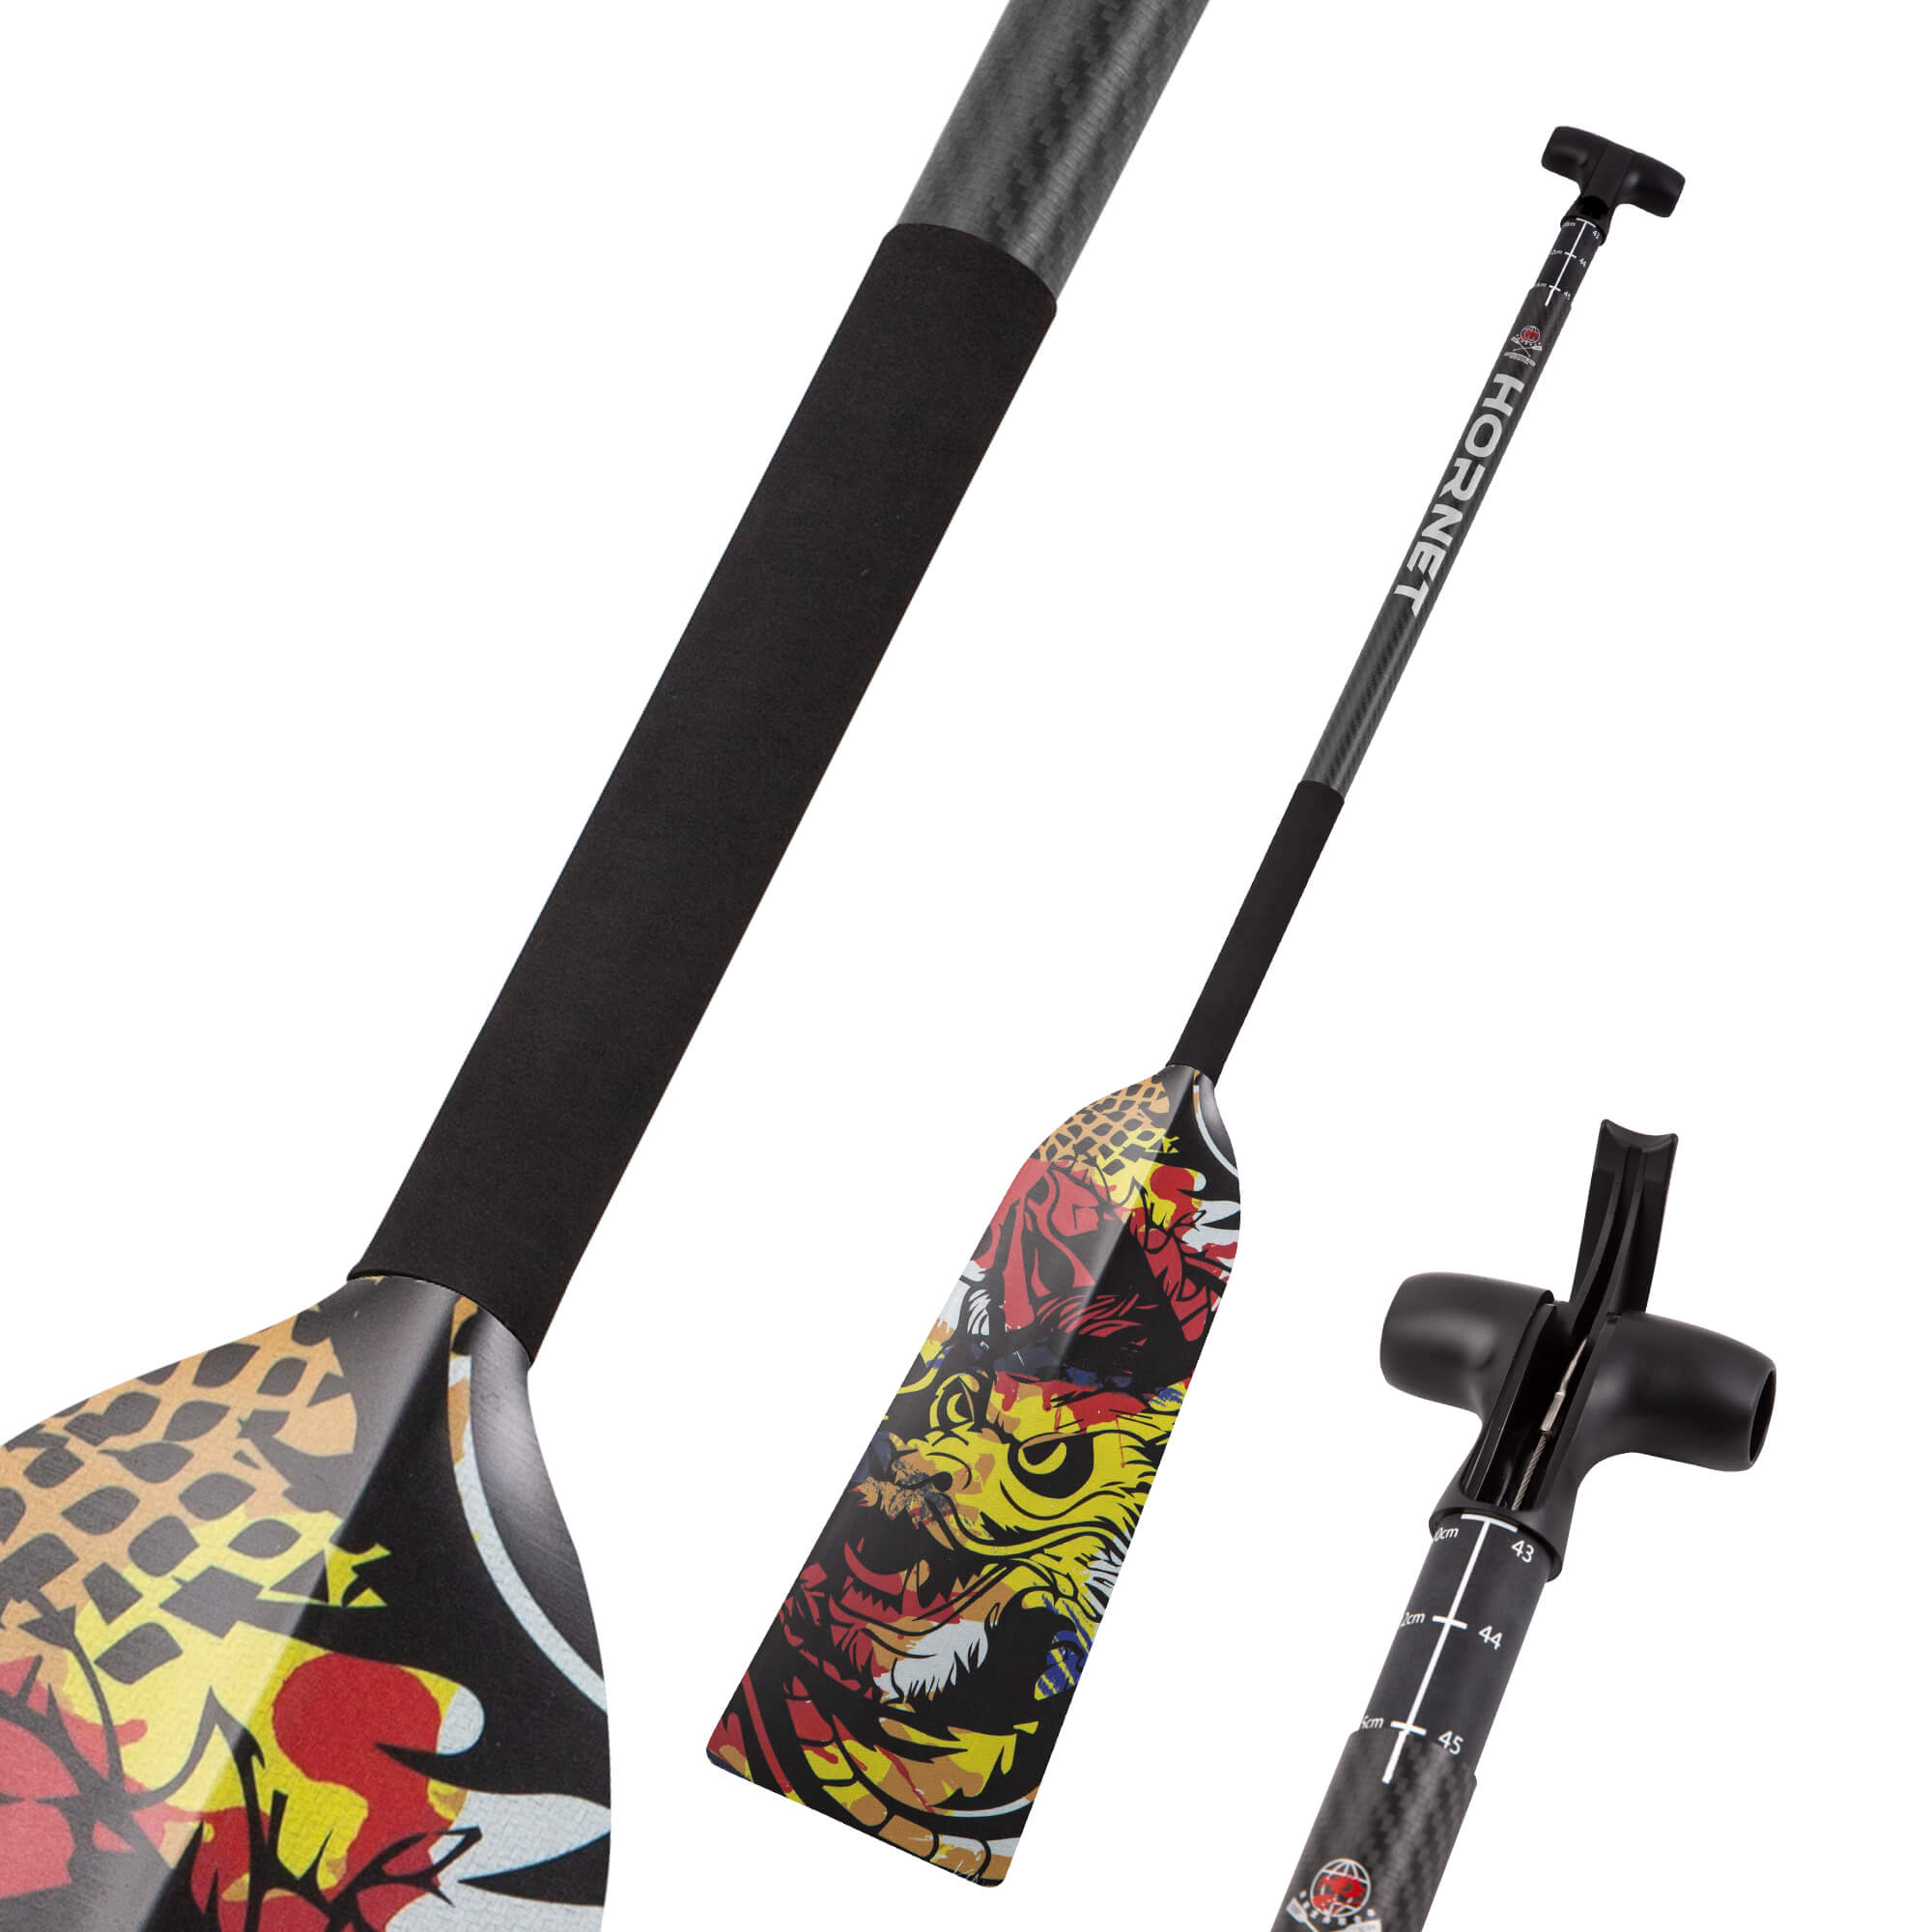 CLEARANCE- Factory Seconds: Dragon Master X22 Sting+ Adjustable Dragon Boat Paddle